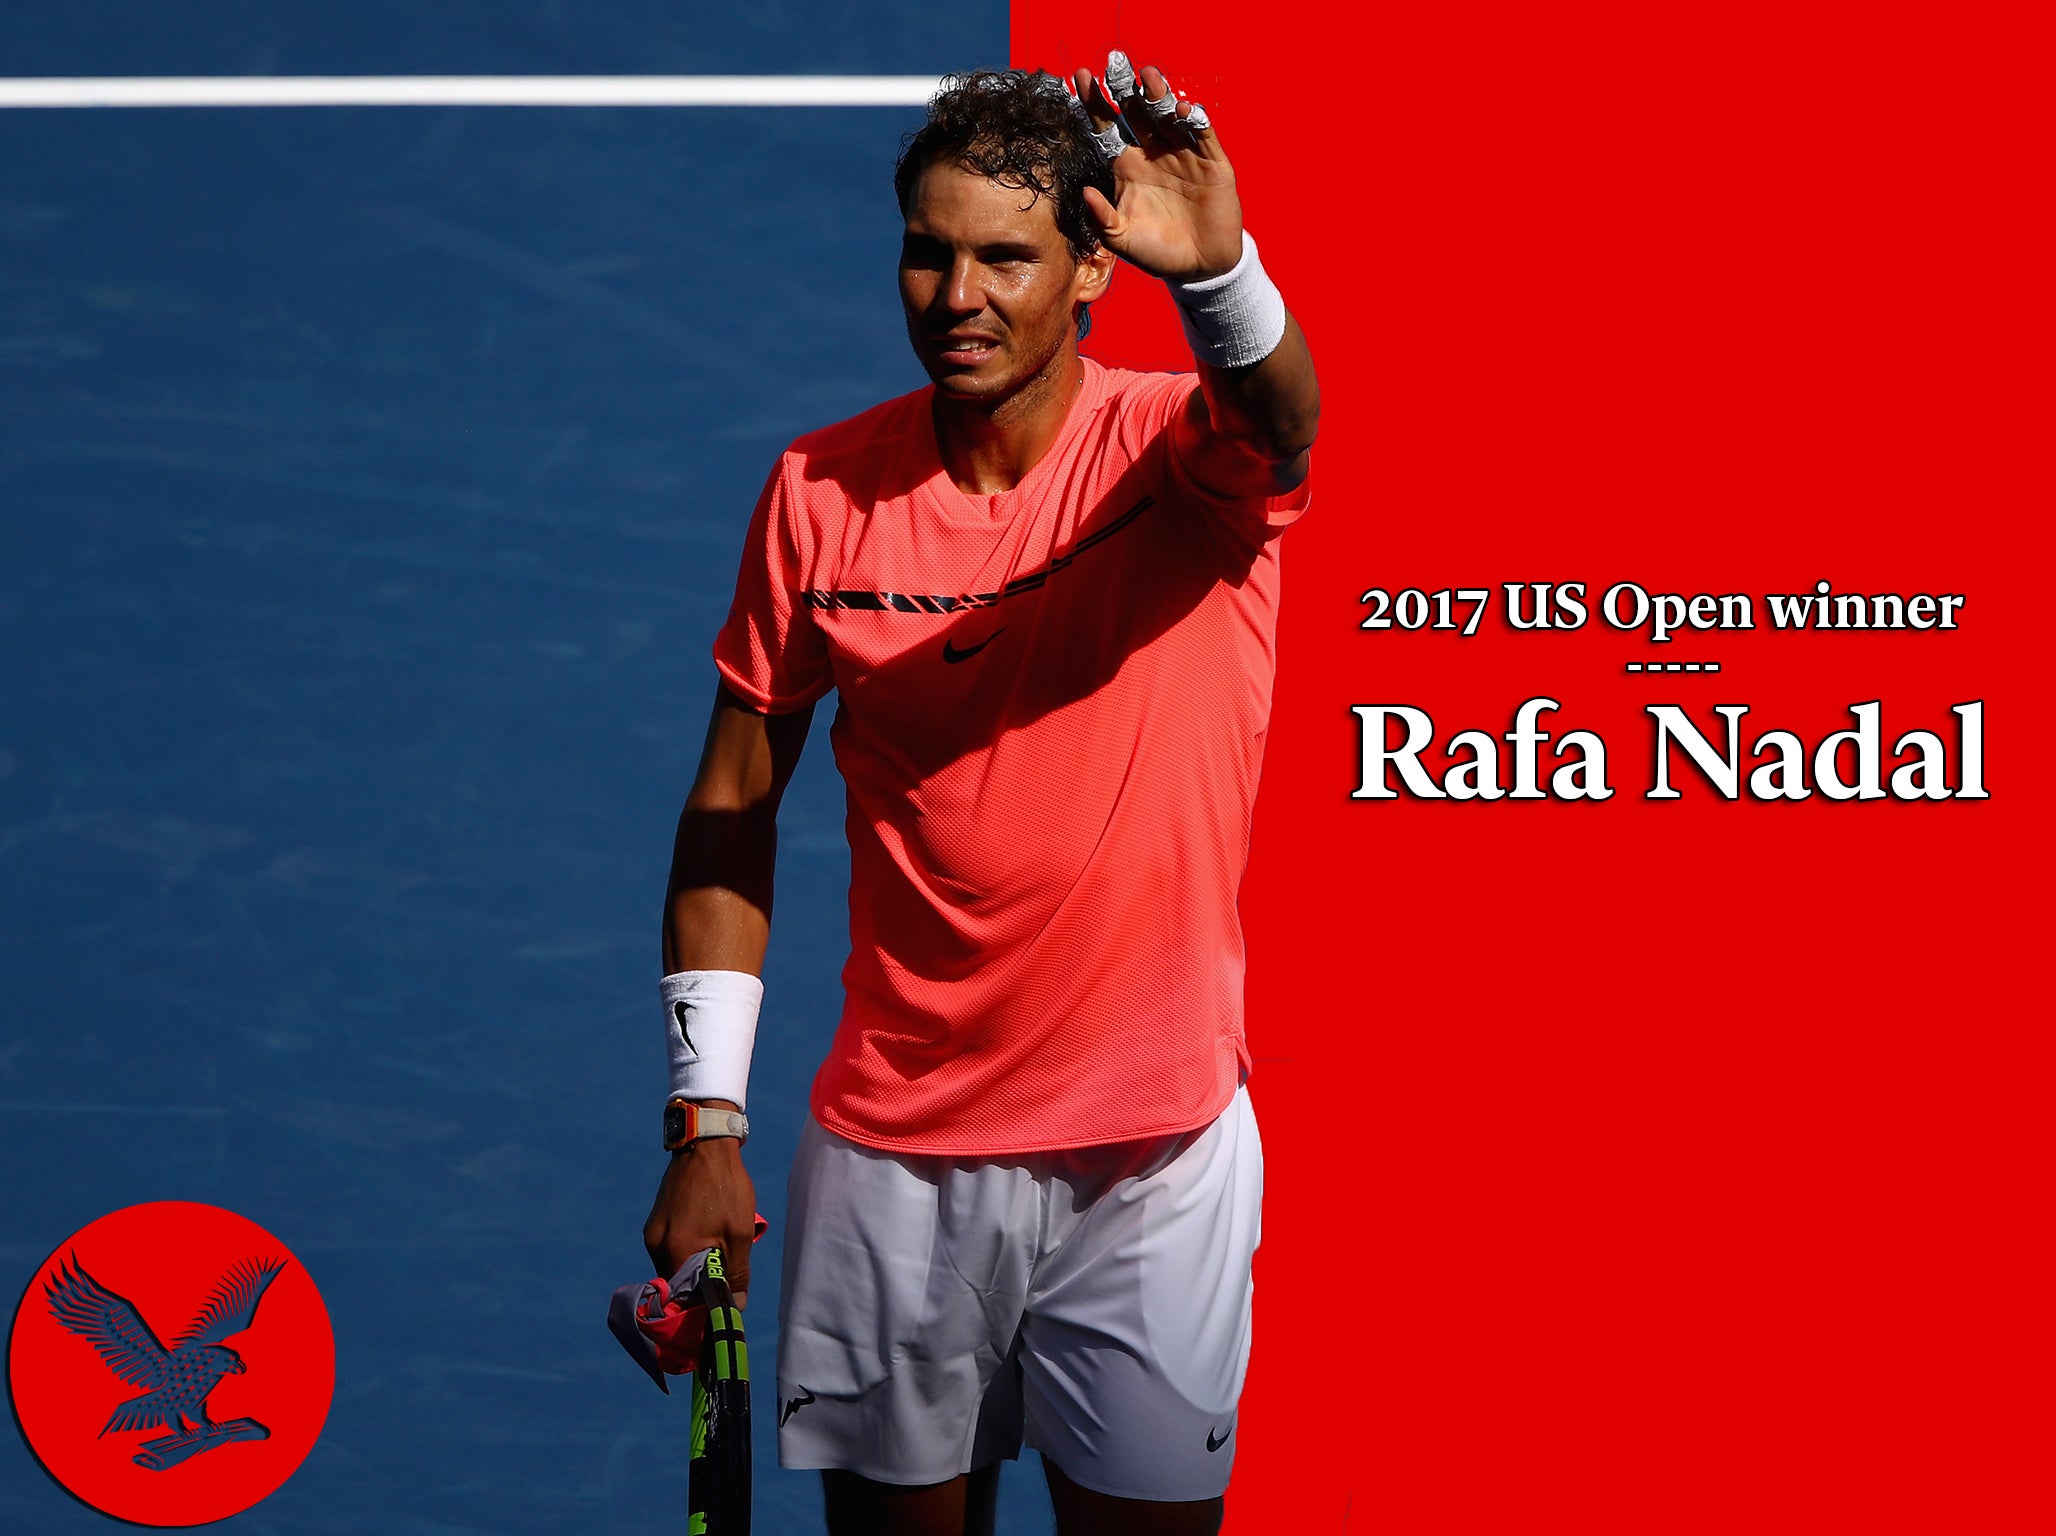 Nadal beat Anderson in straight sets in the US Open final